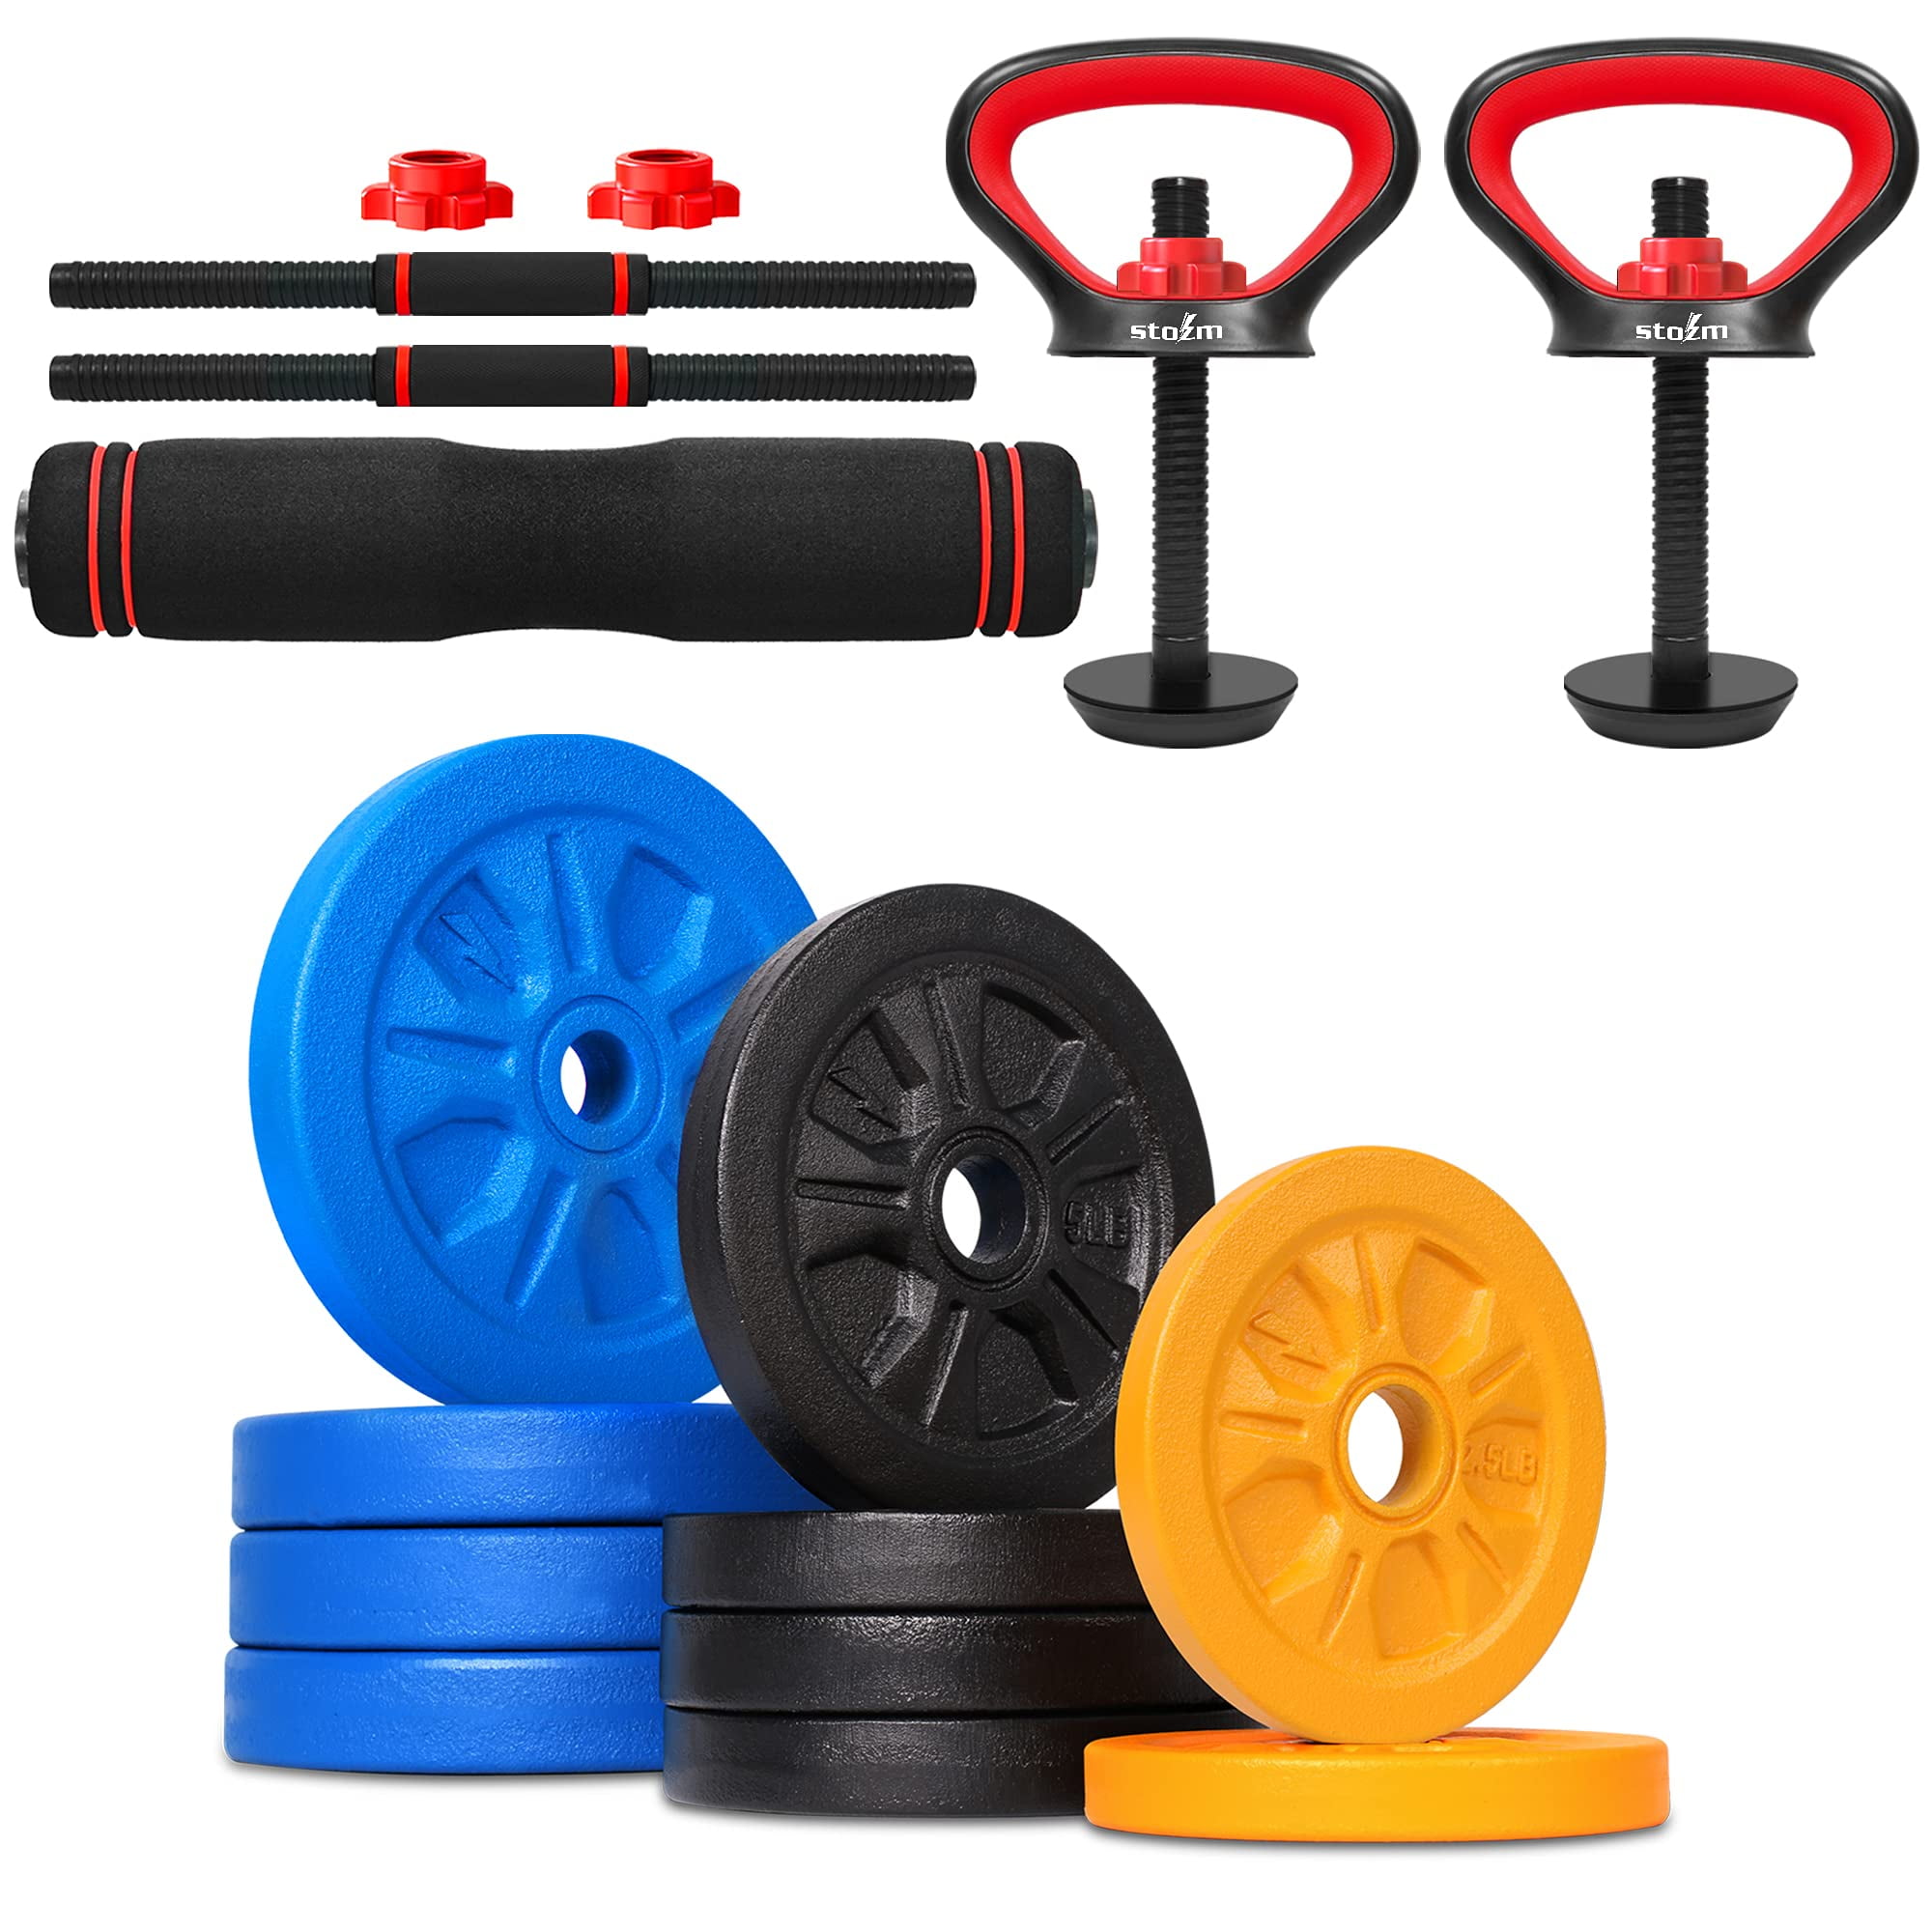  SWOLLHOUSE Weight Lifting Accessories for Men: All-in